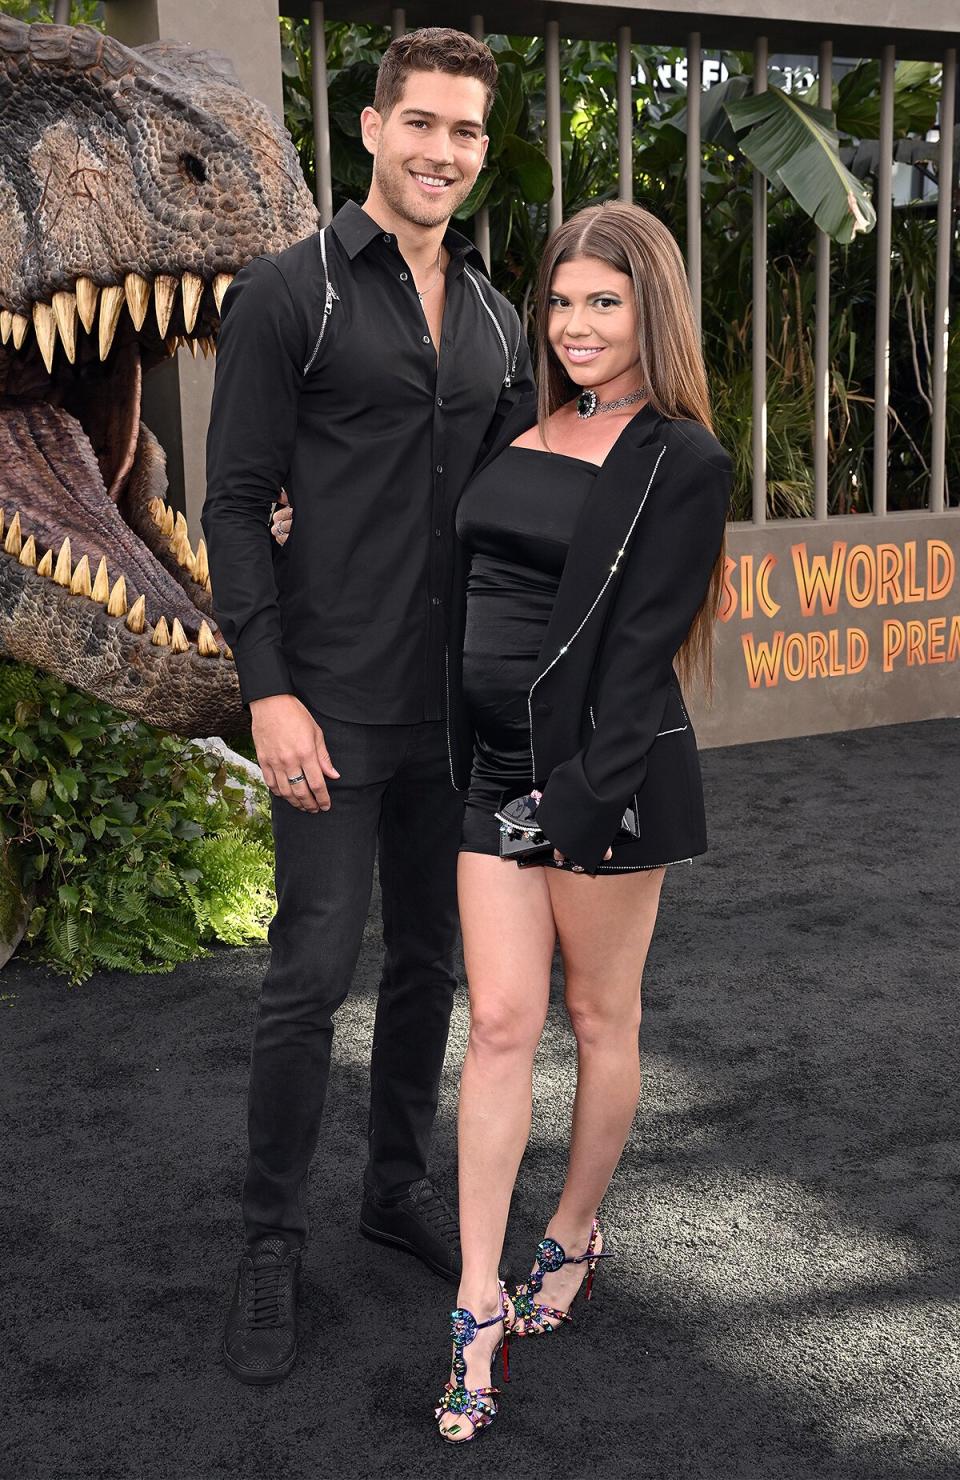 Los Angeles Premiere Of Universal Pictures “Jurassic World Dominion” – Red Carpet